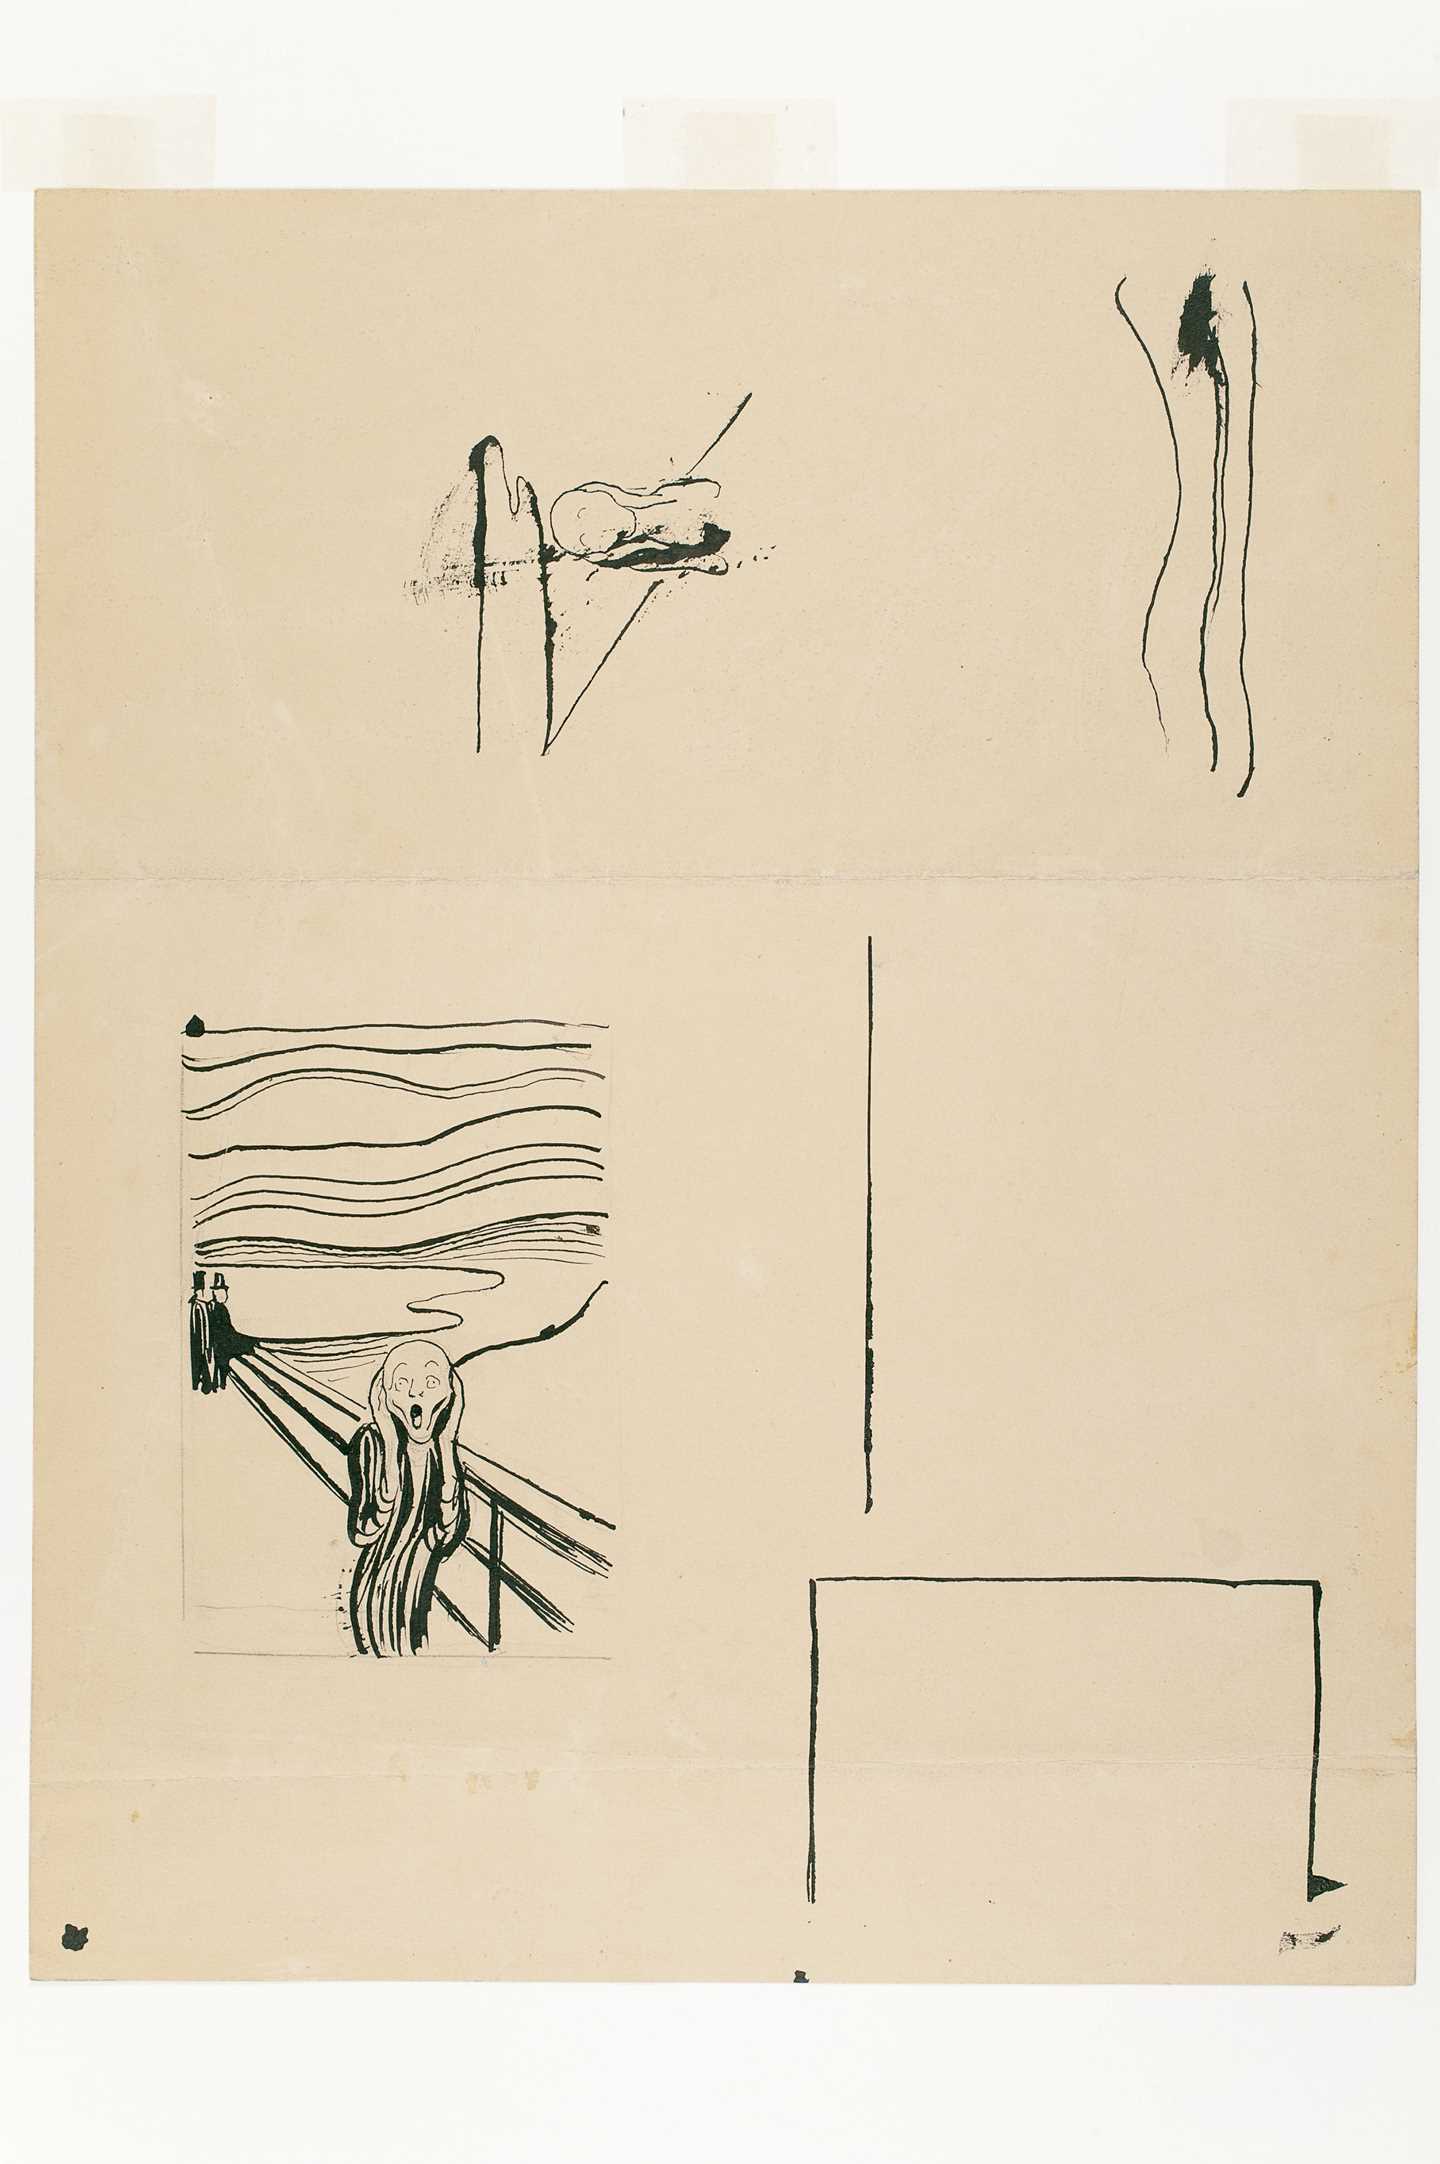 Edvard Munch: Three sketches for The Scream. Pen (ink), pencil, 1895. Photo © Munchmuseet